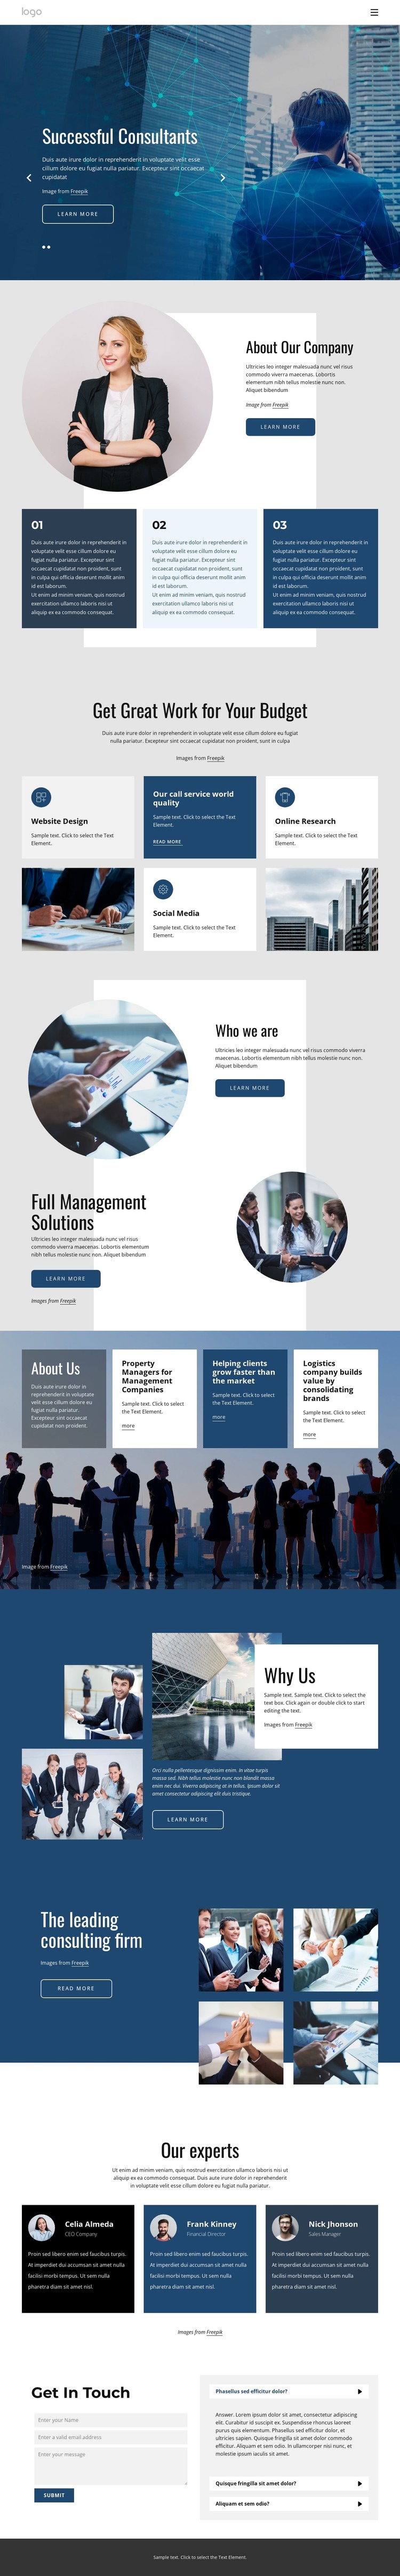 We offer tailored consulting services CSS Template